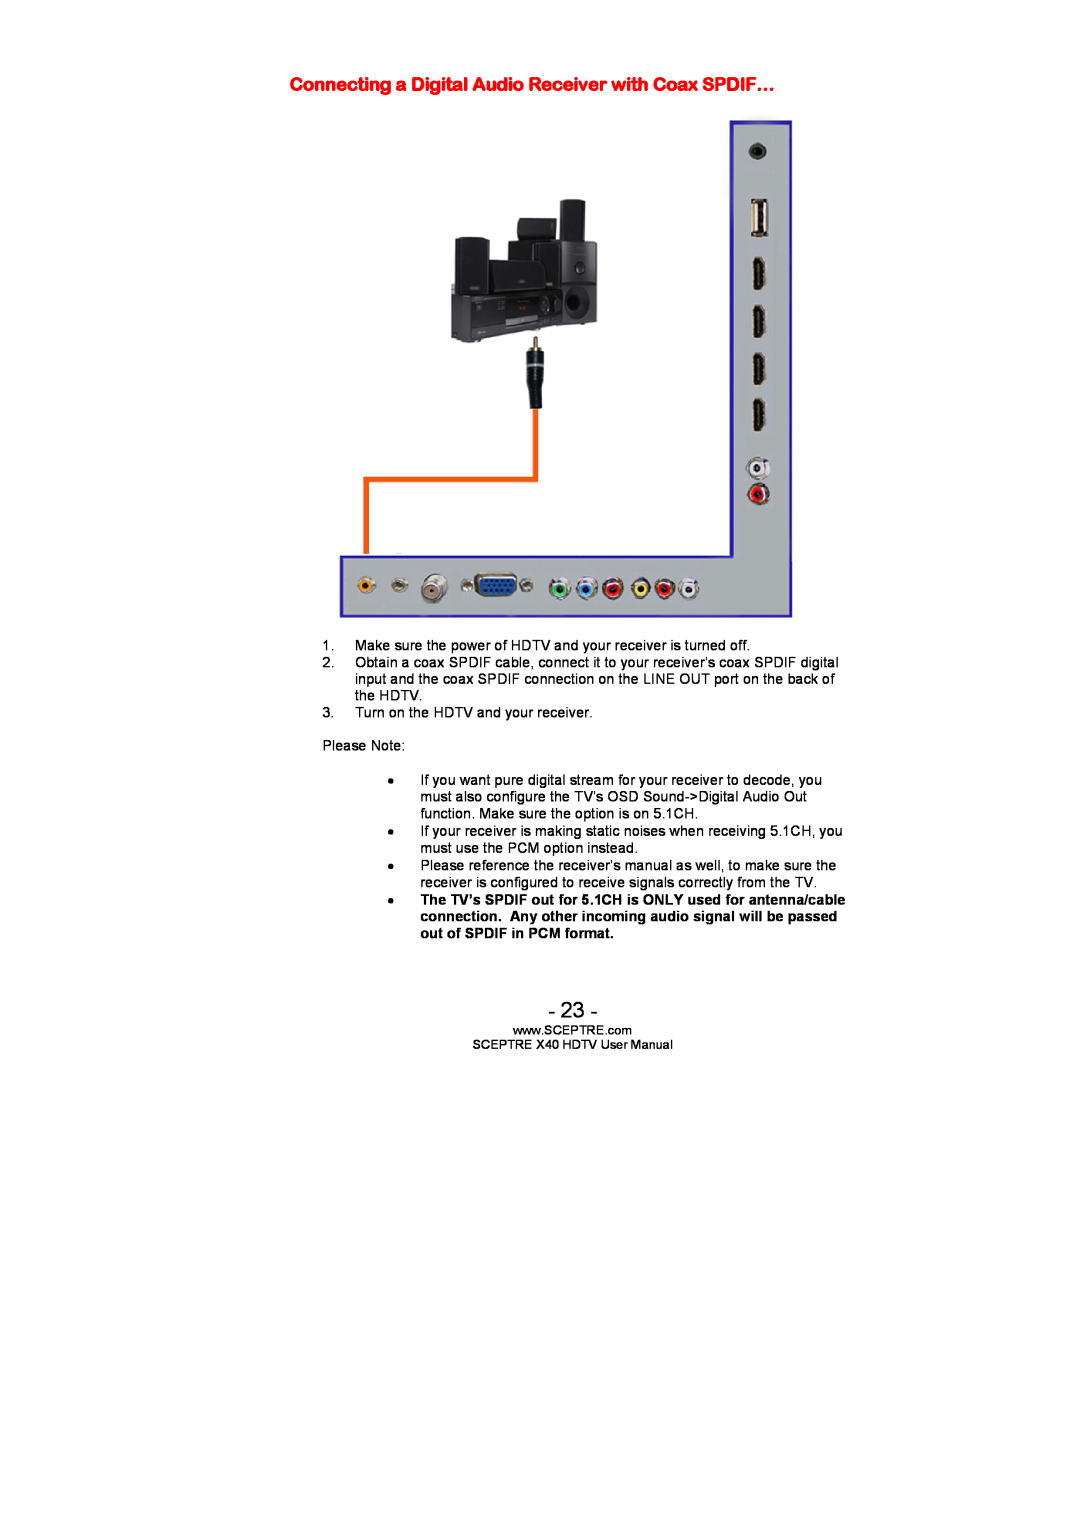 Sceptre Technologies SCEPTRE X40 HDTV user manual Connecting a Digital Audio Receiver with Coax SPDIF… 